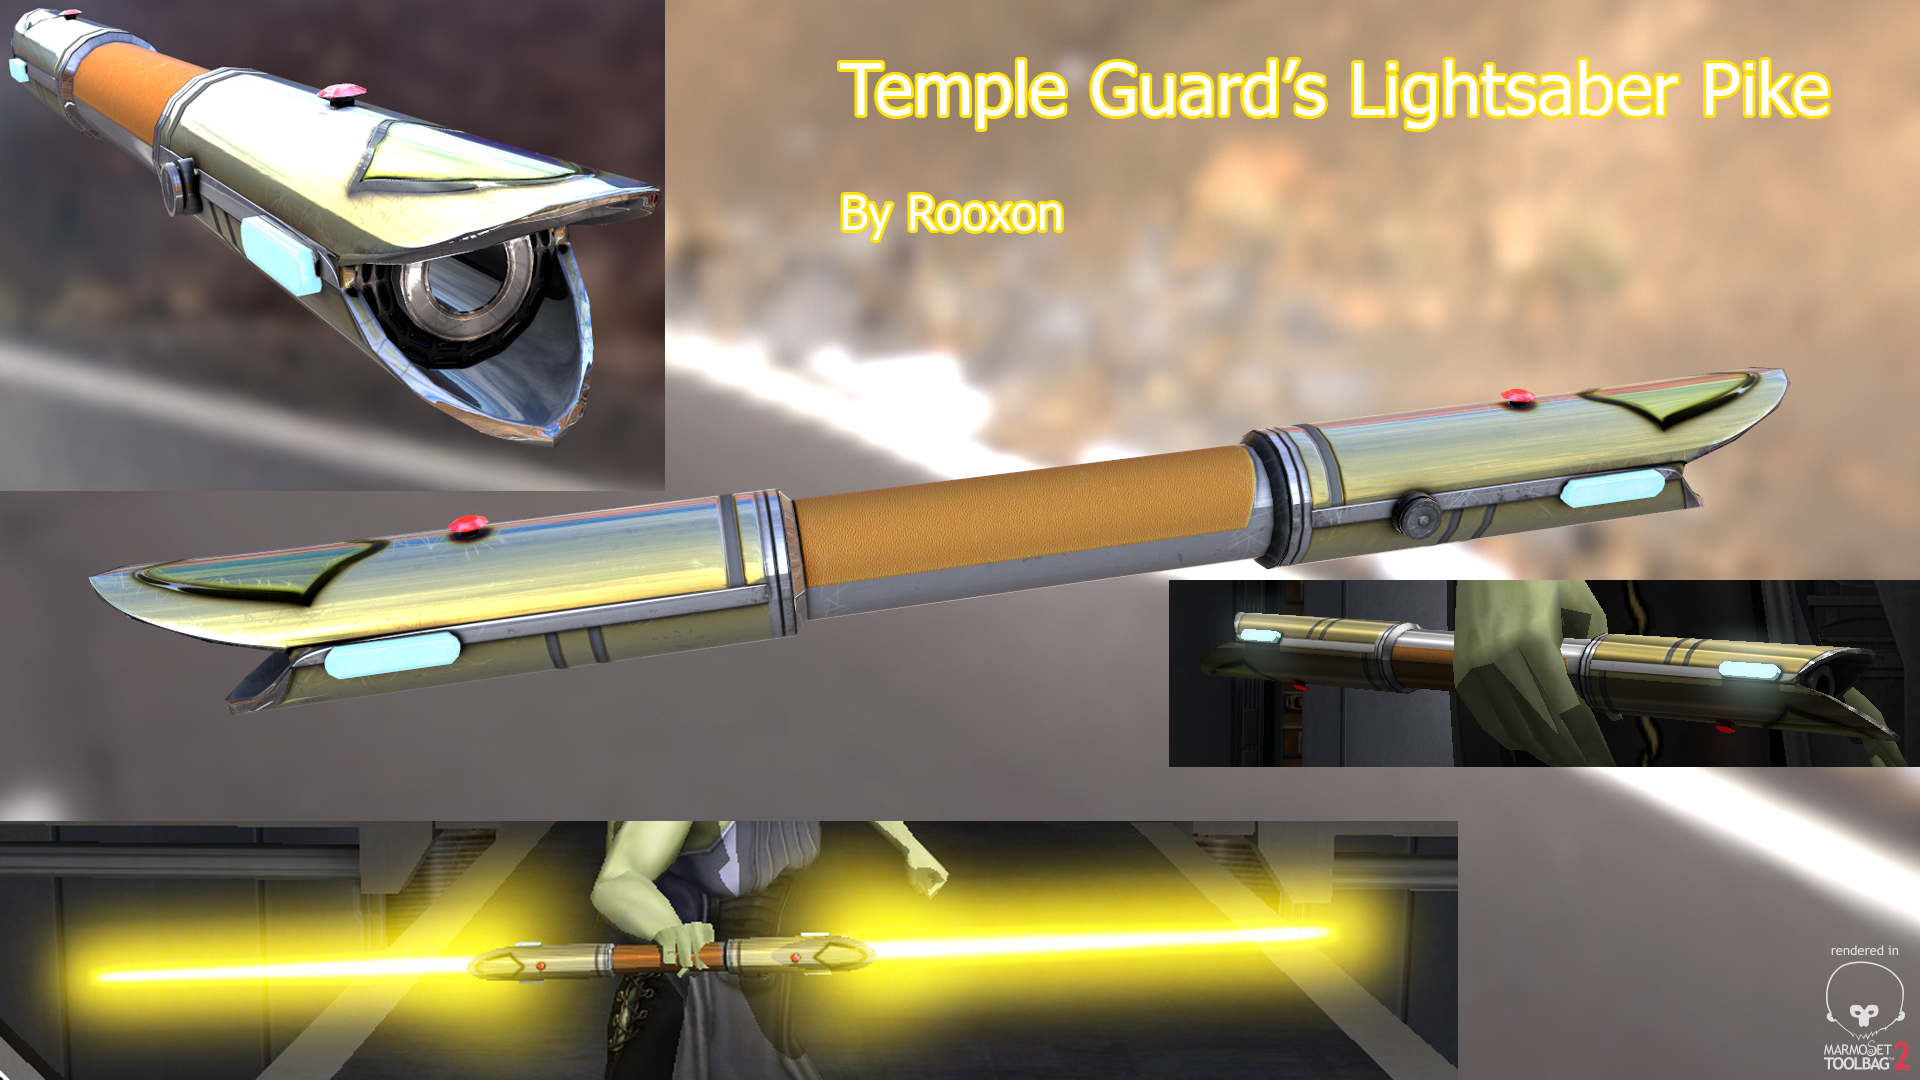 More information about "Jedi Temple Guard's Lightsaber pike"